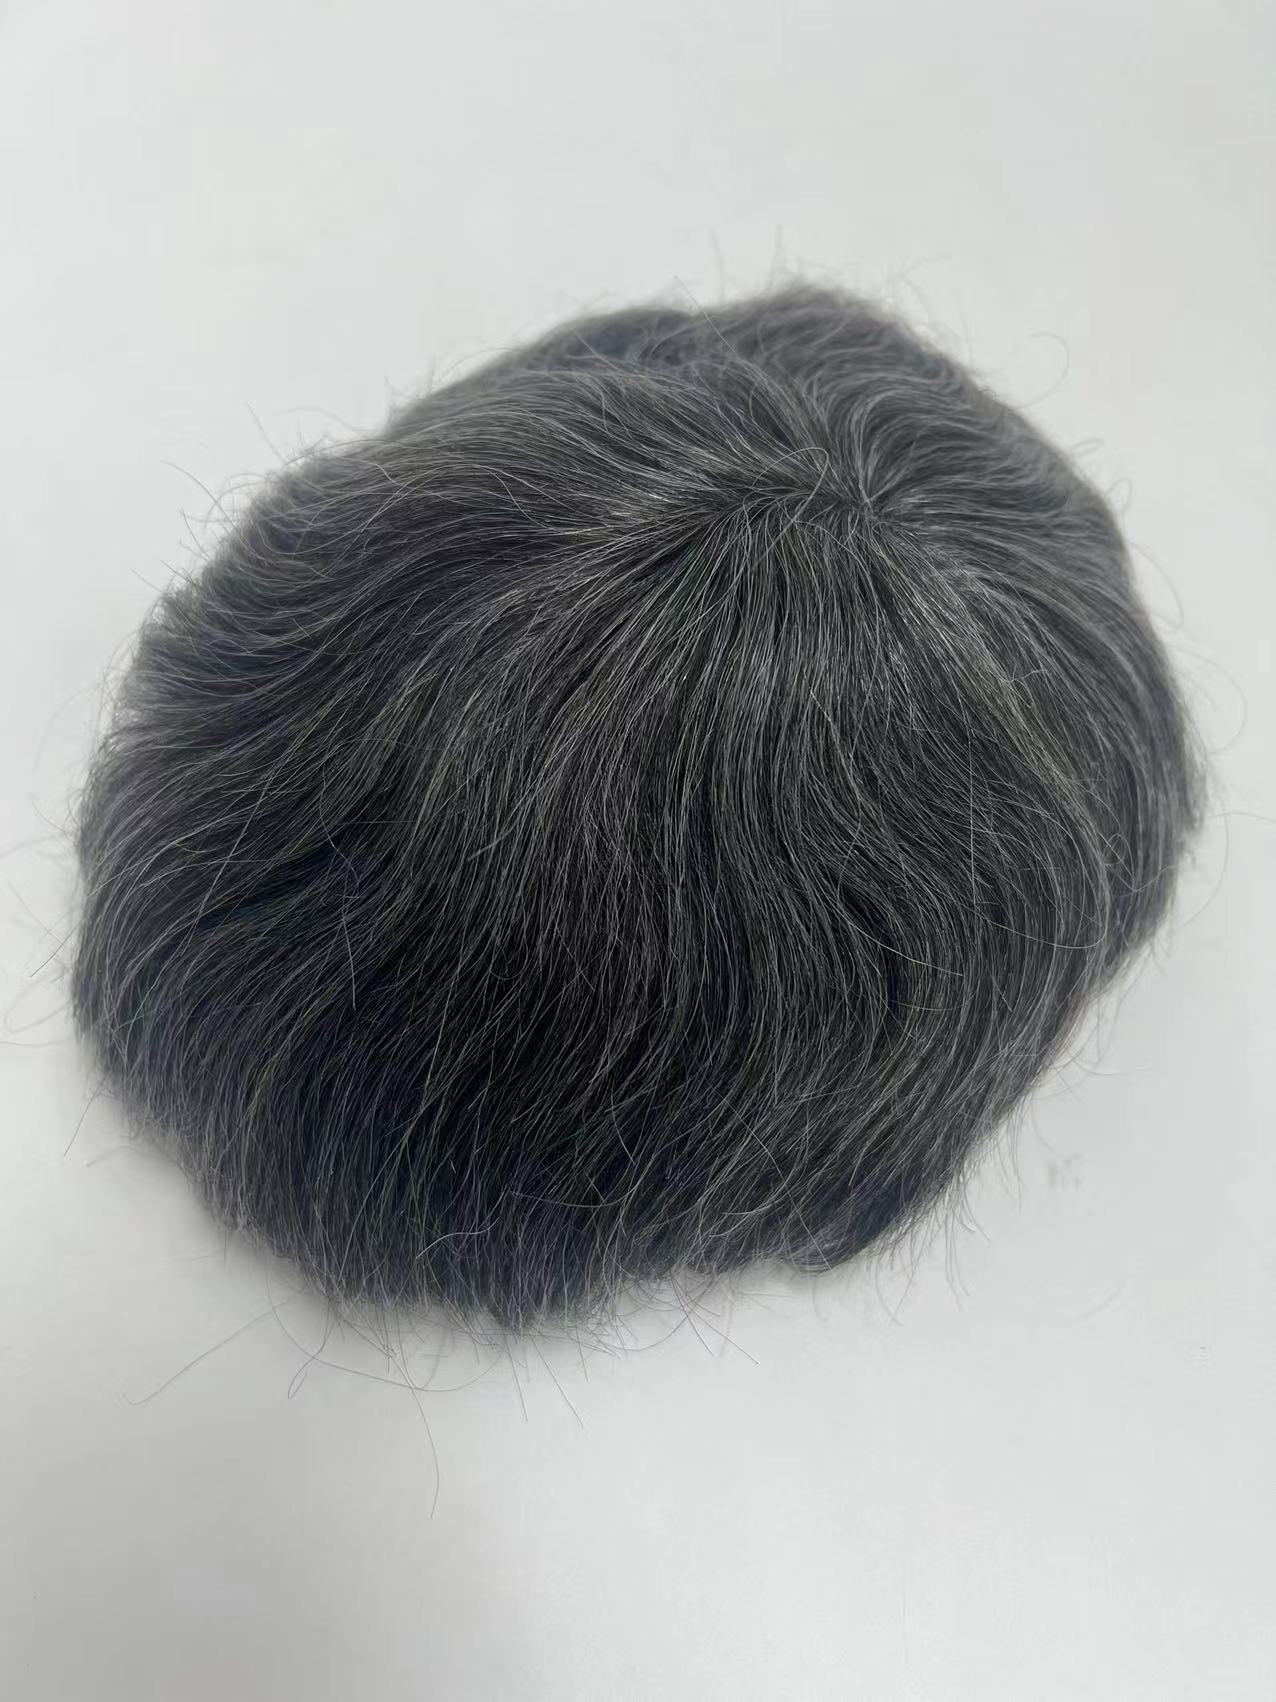 SW039489 Fine Welded Mono Base Hair System for Wholesale (4)